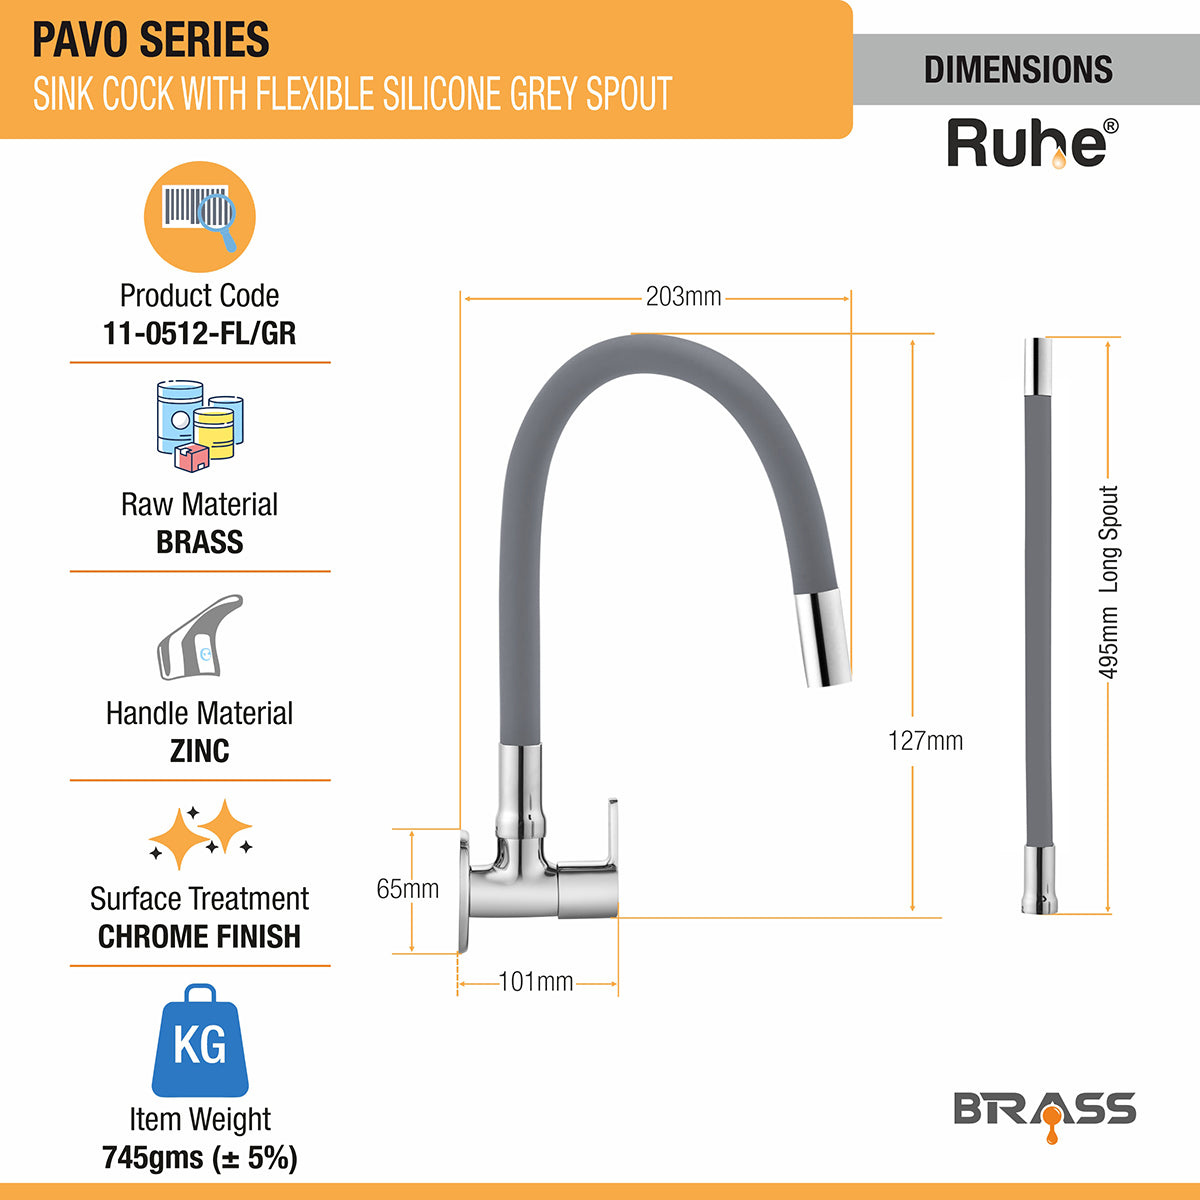 Pavo Brass Sink Tap with Silicone Grey Flexible Spout dimensions and sizes